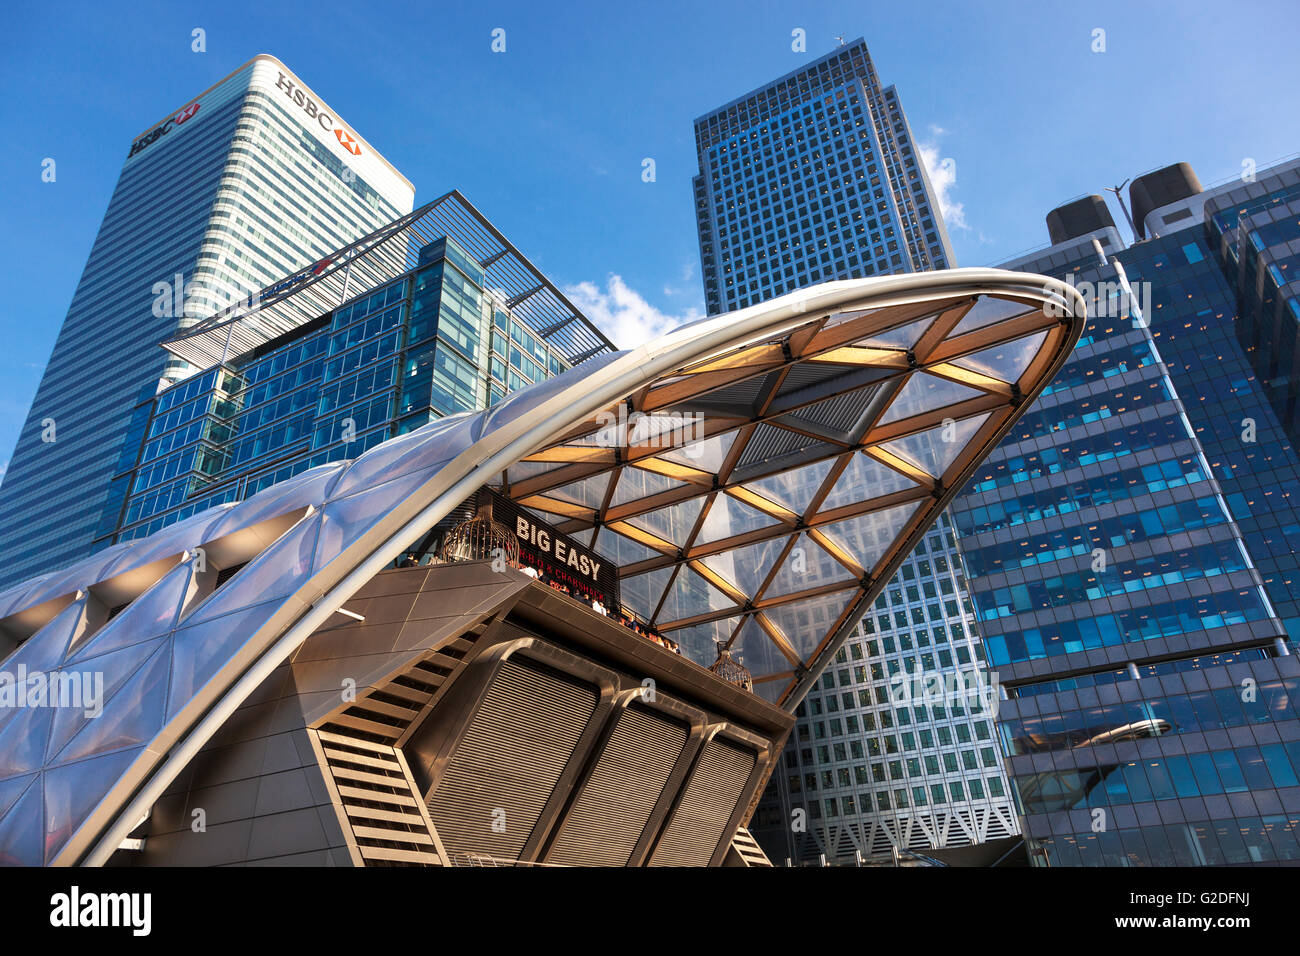 Canary Wharf crossrail station with Canary Wharf skyscrapers in the background Stock Photo